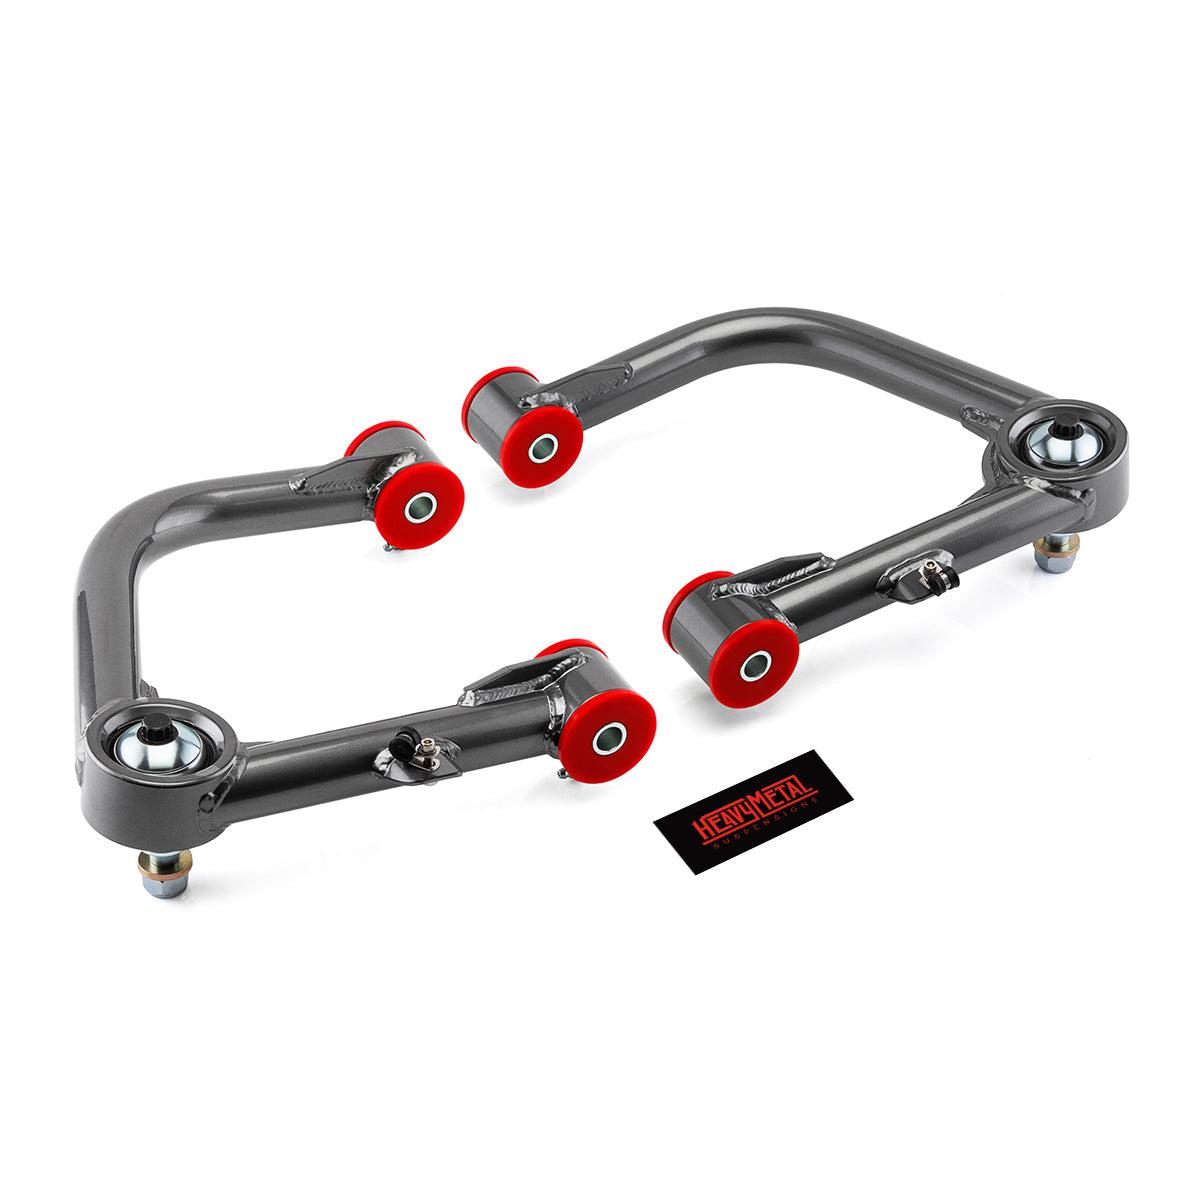 2008-2020 Toyota Sequoia Upper Control Arms With Uni-Ball Bearings